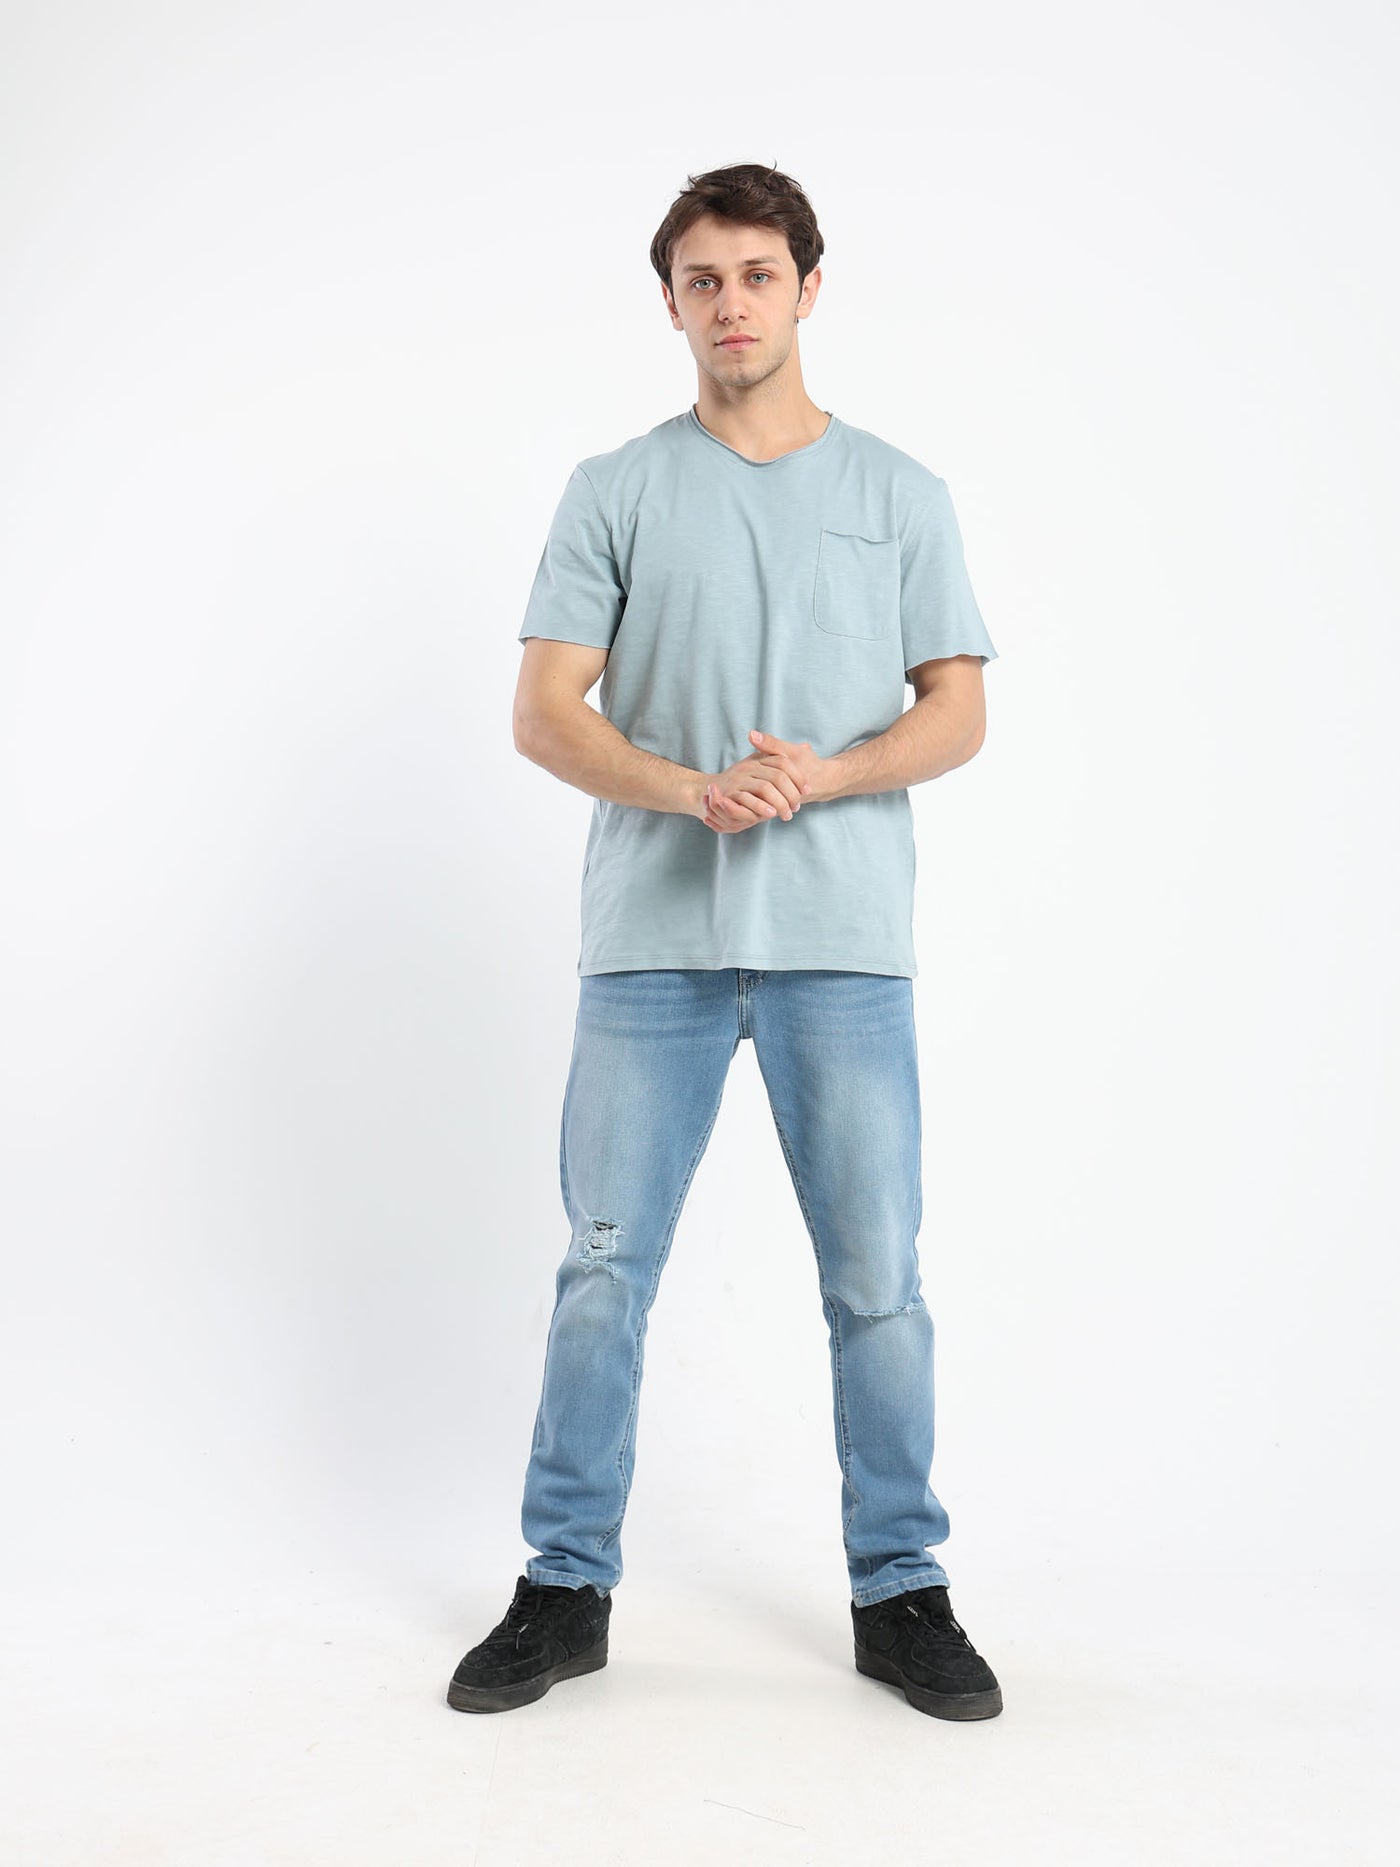 T-Shirt - Relaxed - Front Pocket